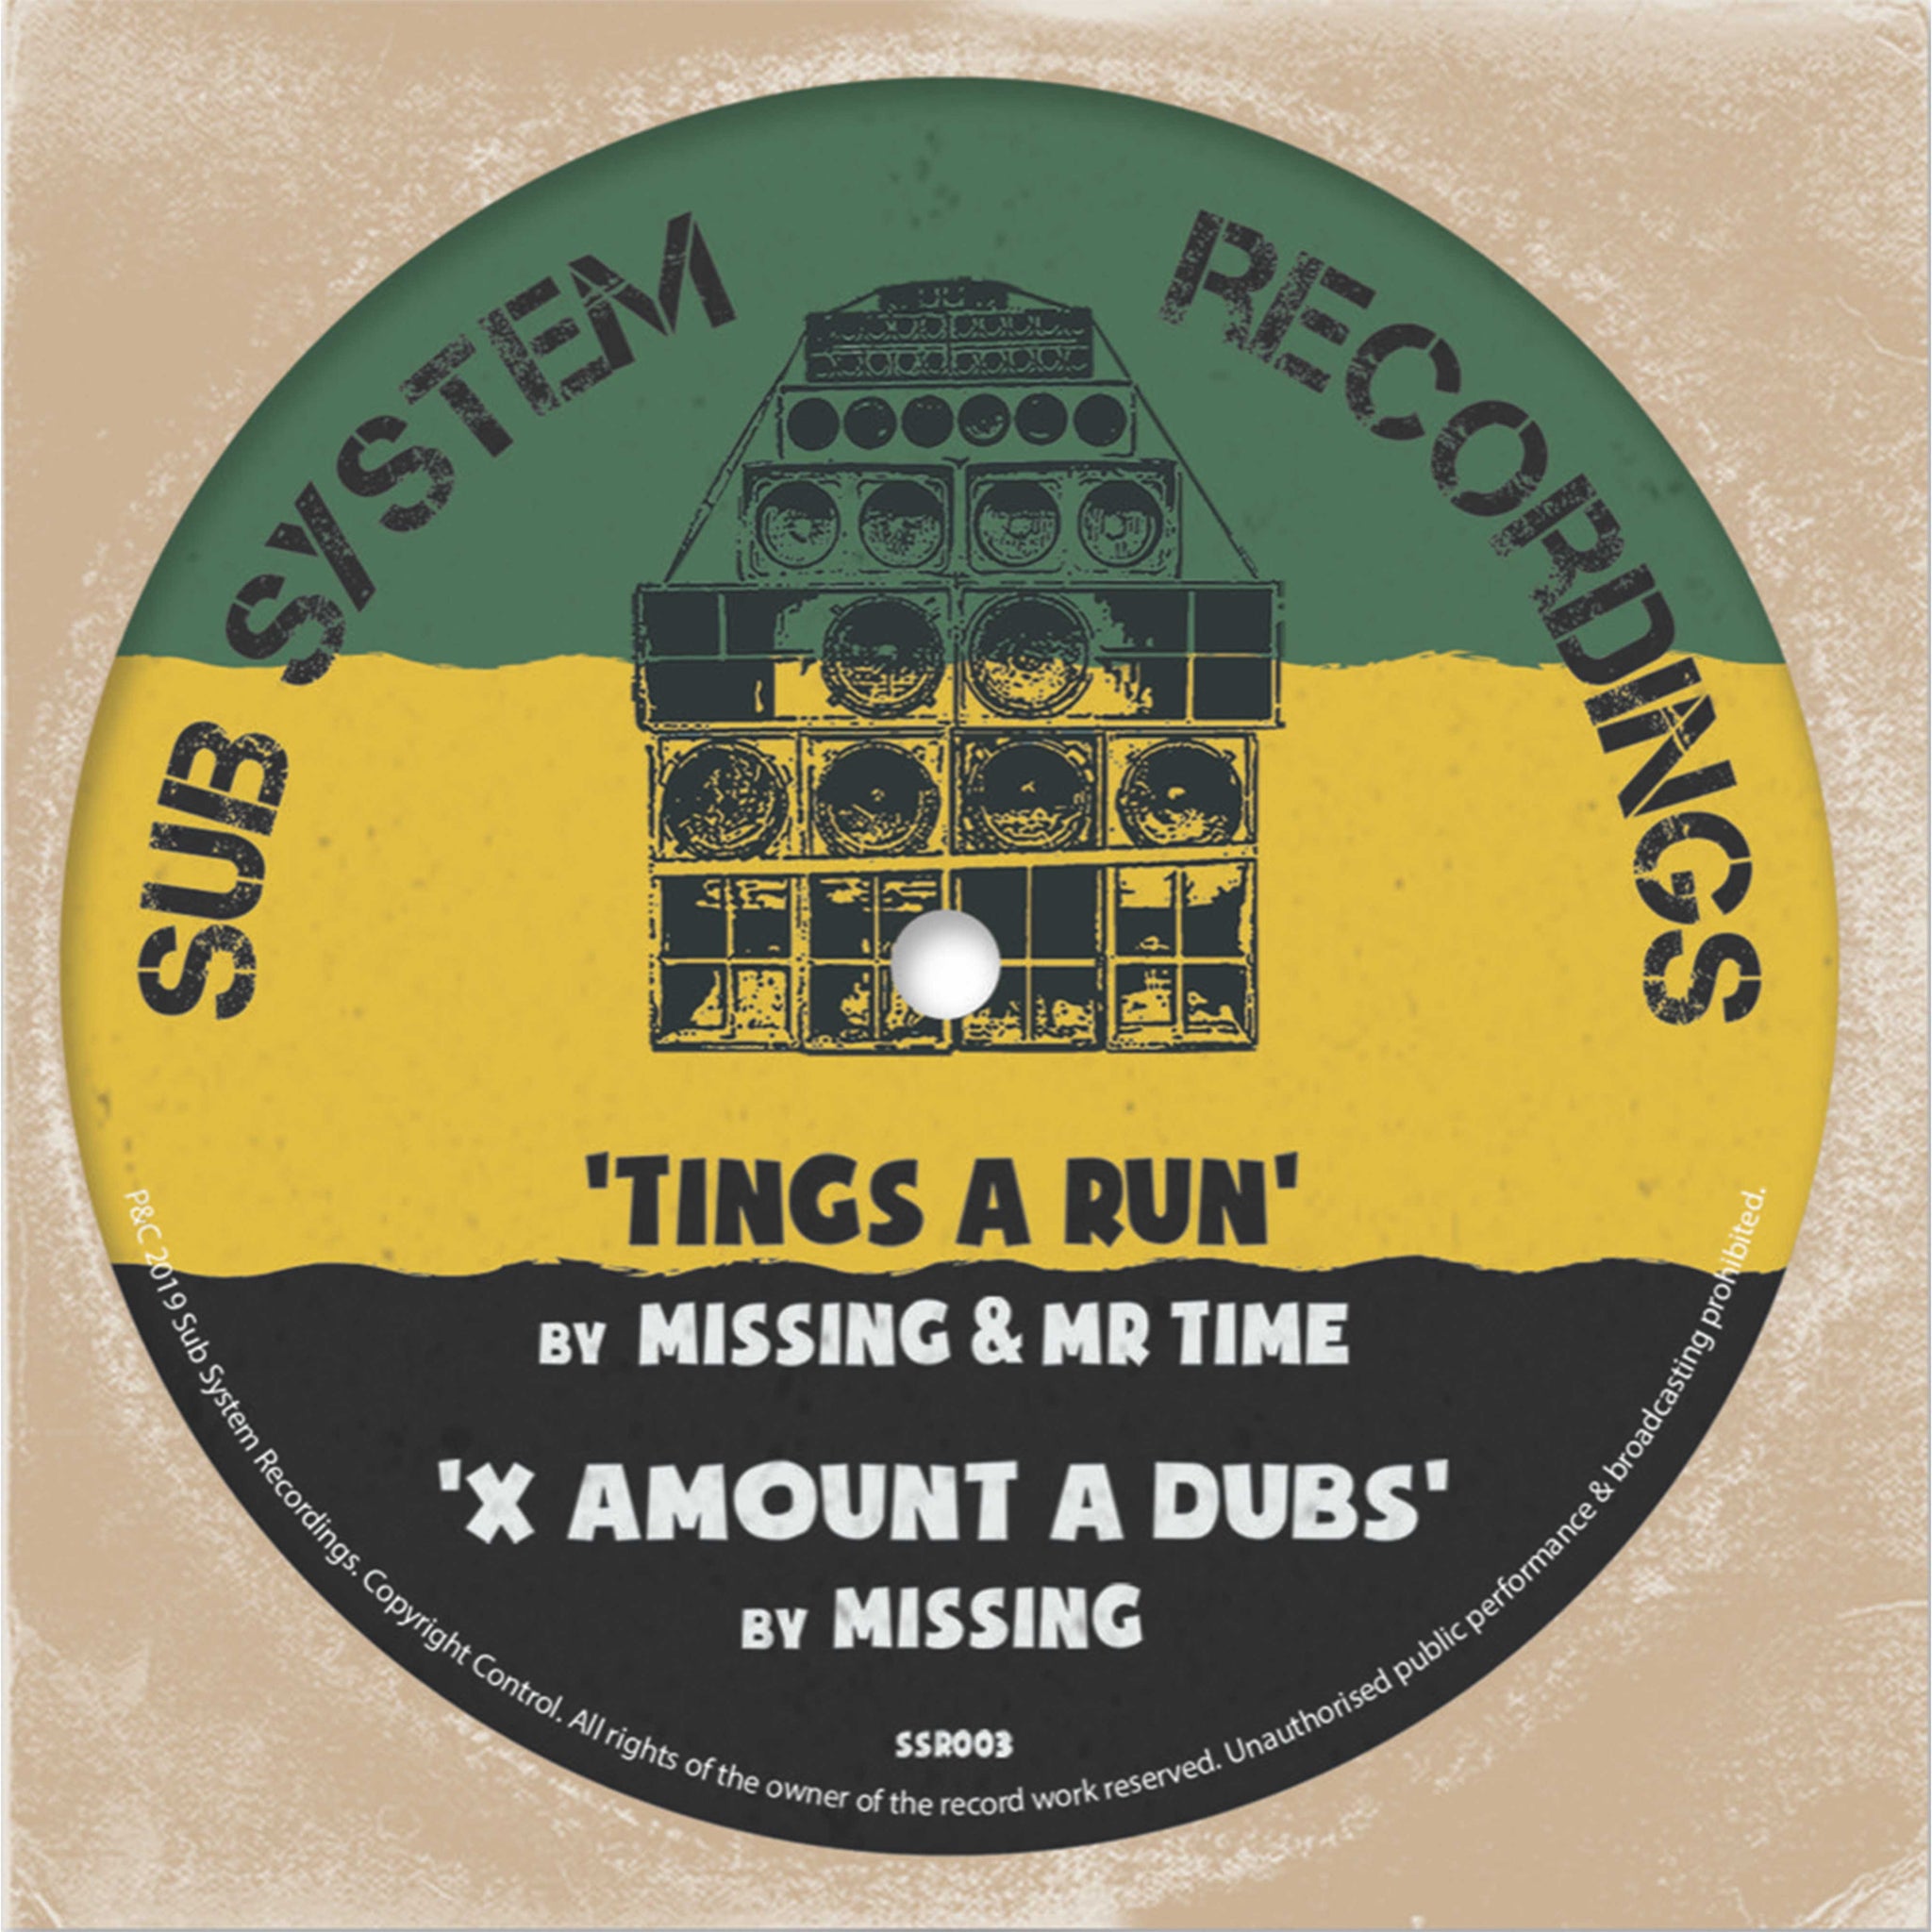 Missing & Mr Time - Tings a Run / X Amount A Dubs (Limited 10" Vinyl)